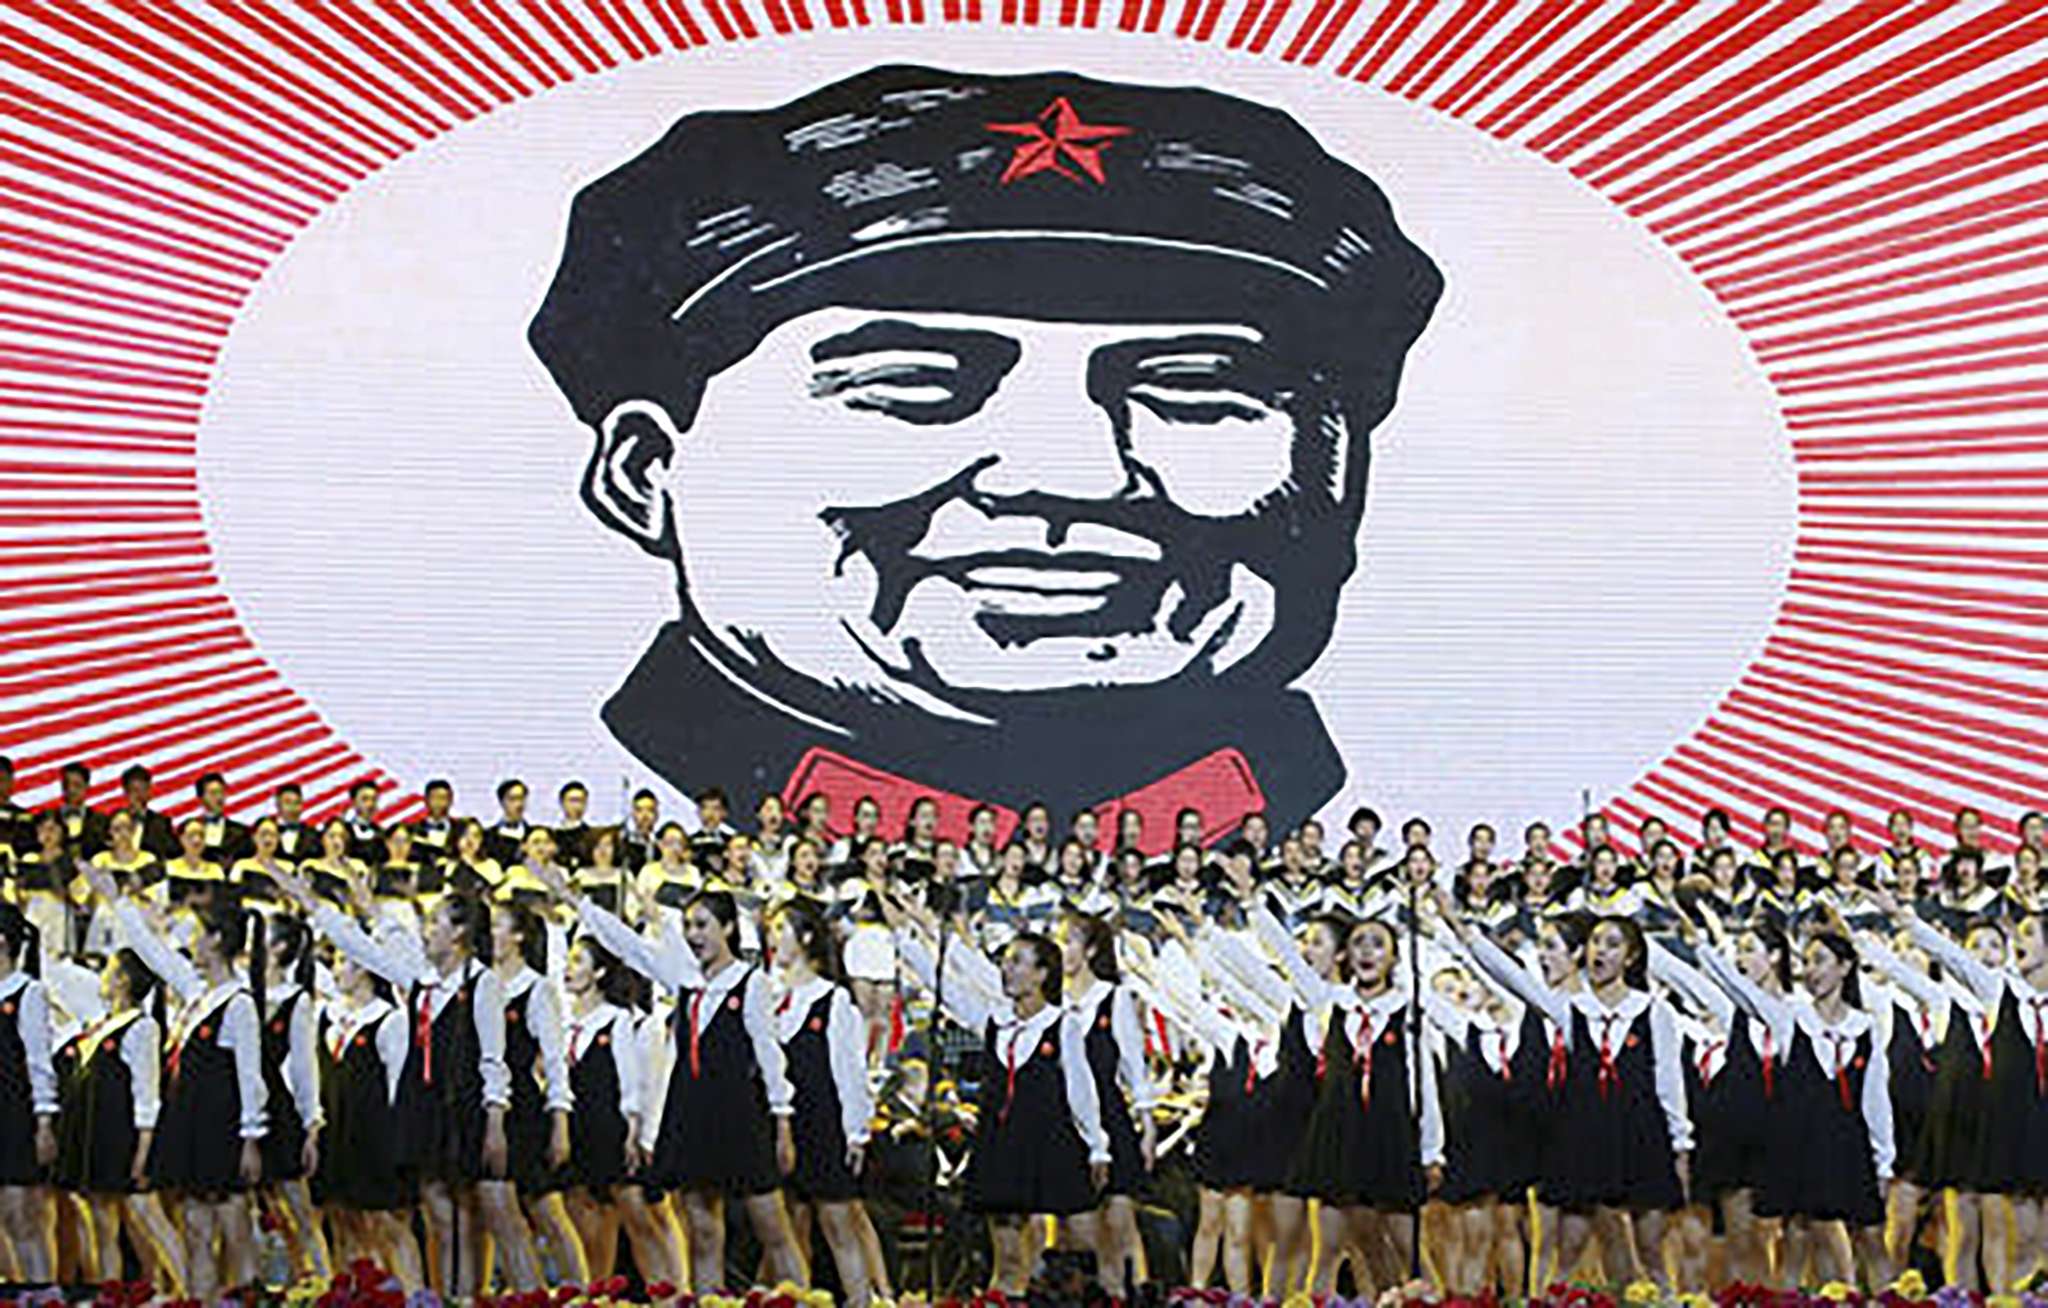 A show in Beijing celebrates “Red Songs” from the Cultural Revolution era. File Photo